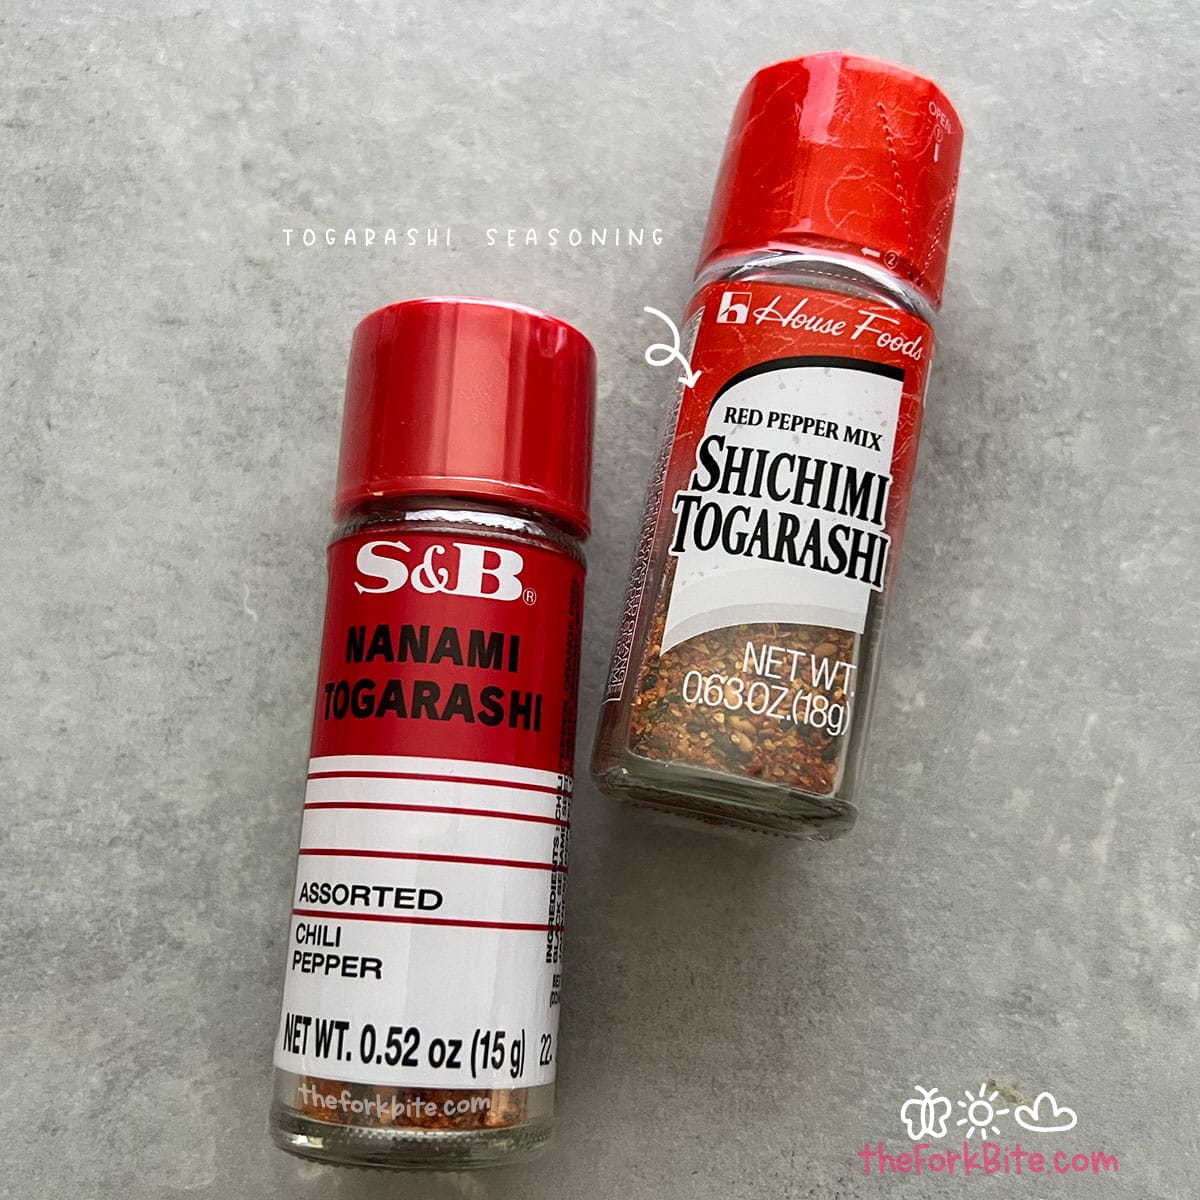 Despite having similar ingredients, the proportions are slightly different. Chili pepper is more dominant than other spices in Shichimi togarashi, in contrast to Nanami togarashi, which is more balanced. 